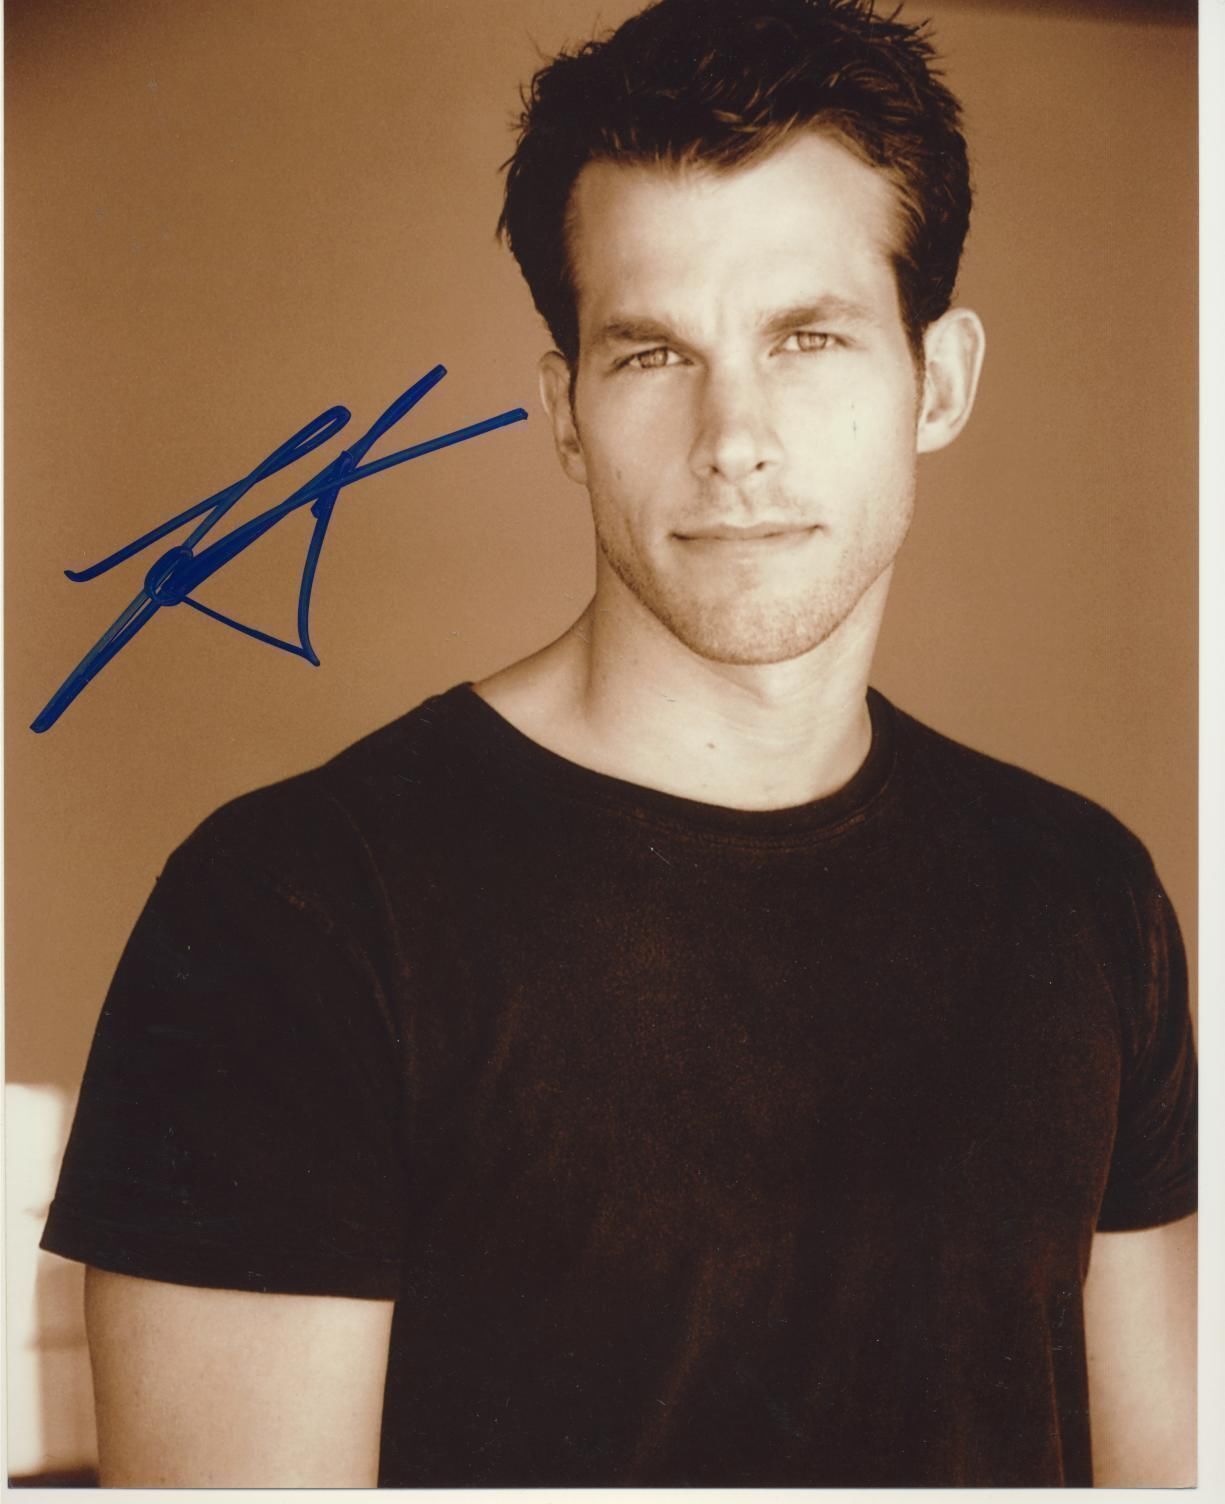 Mark Lutz Autograph ANGEL Signed 10x8 Photo Poster painting AFTAL [6898]